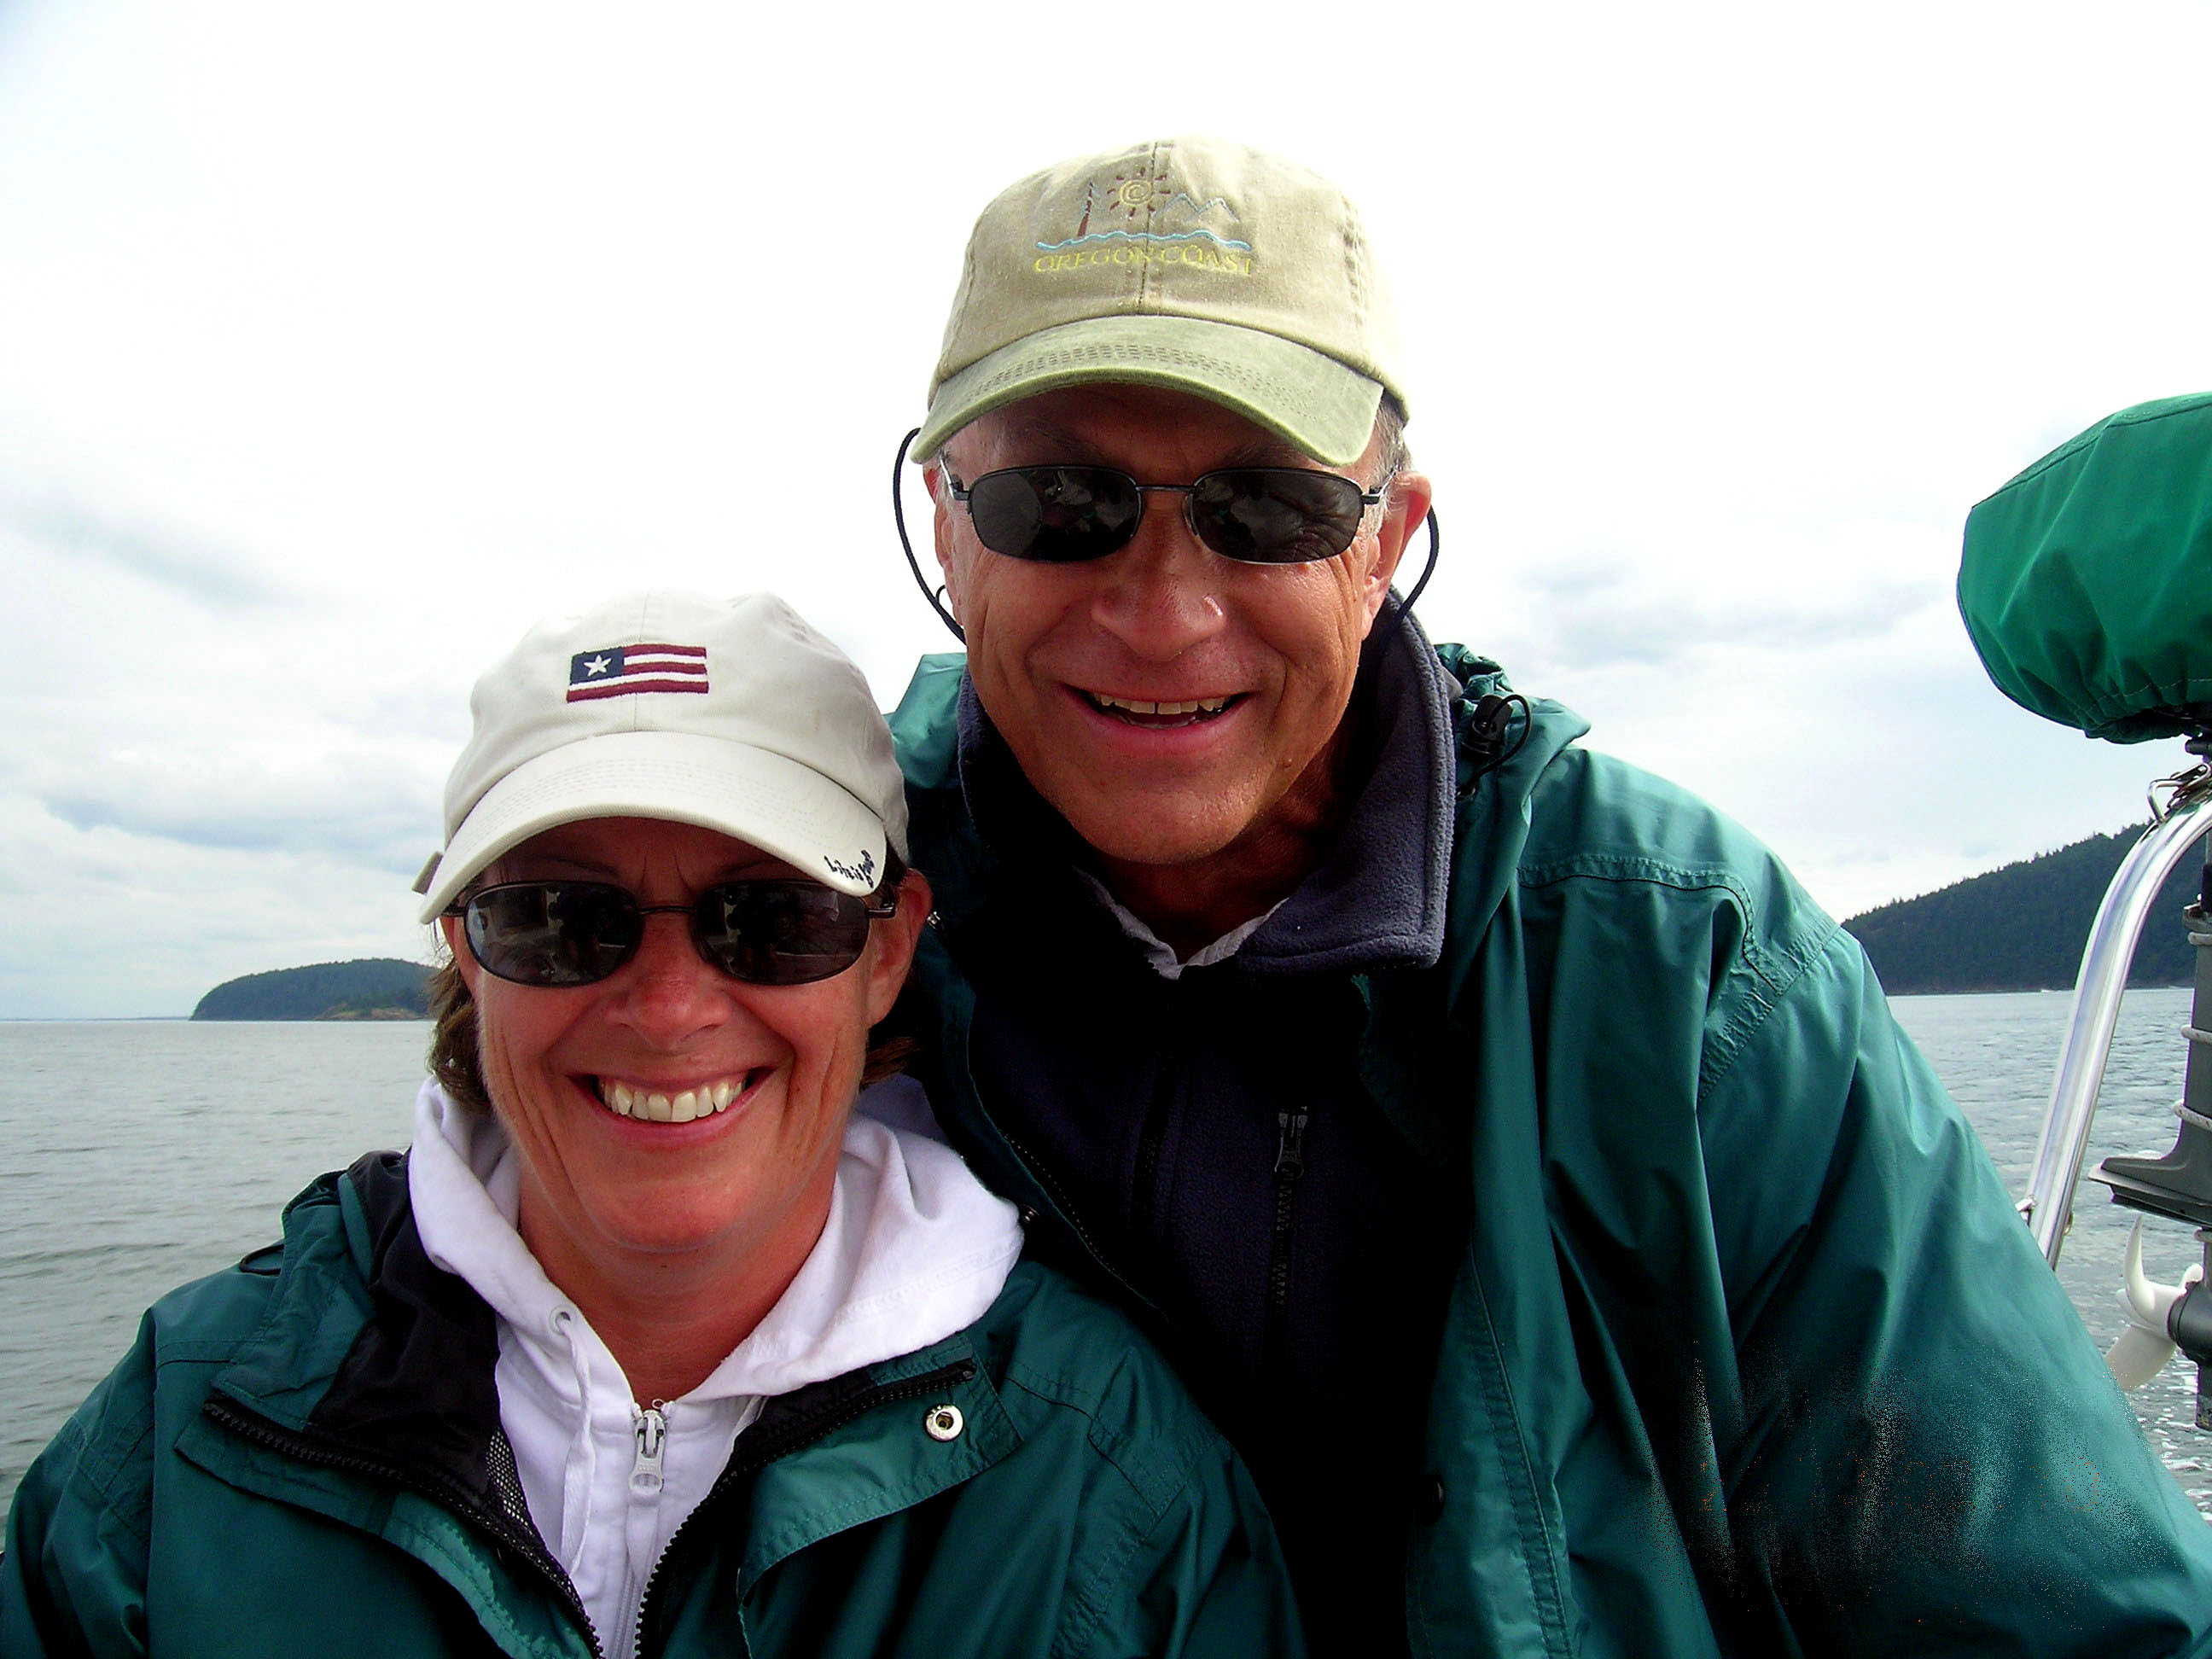 Jim & Annie Barborinas, owners of Urban Forestry Services, Inc. and Urban Forest Nursery, Inc.